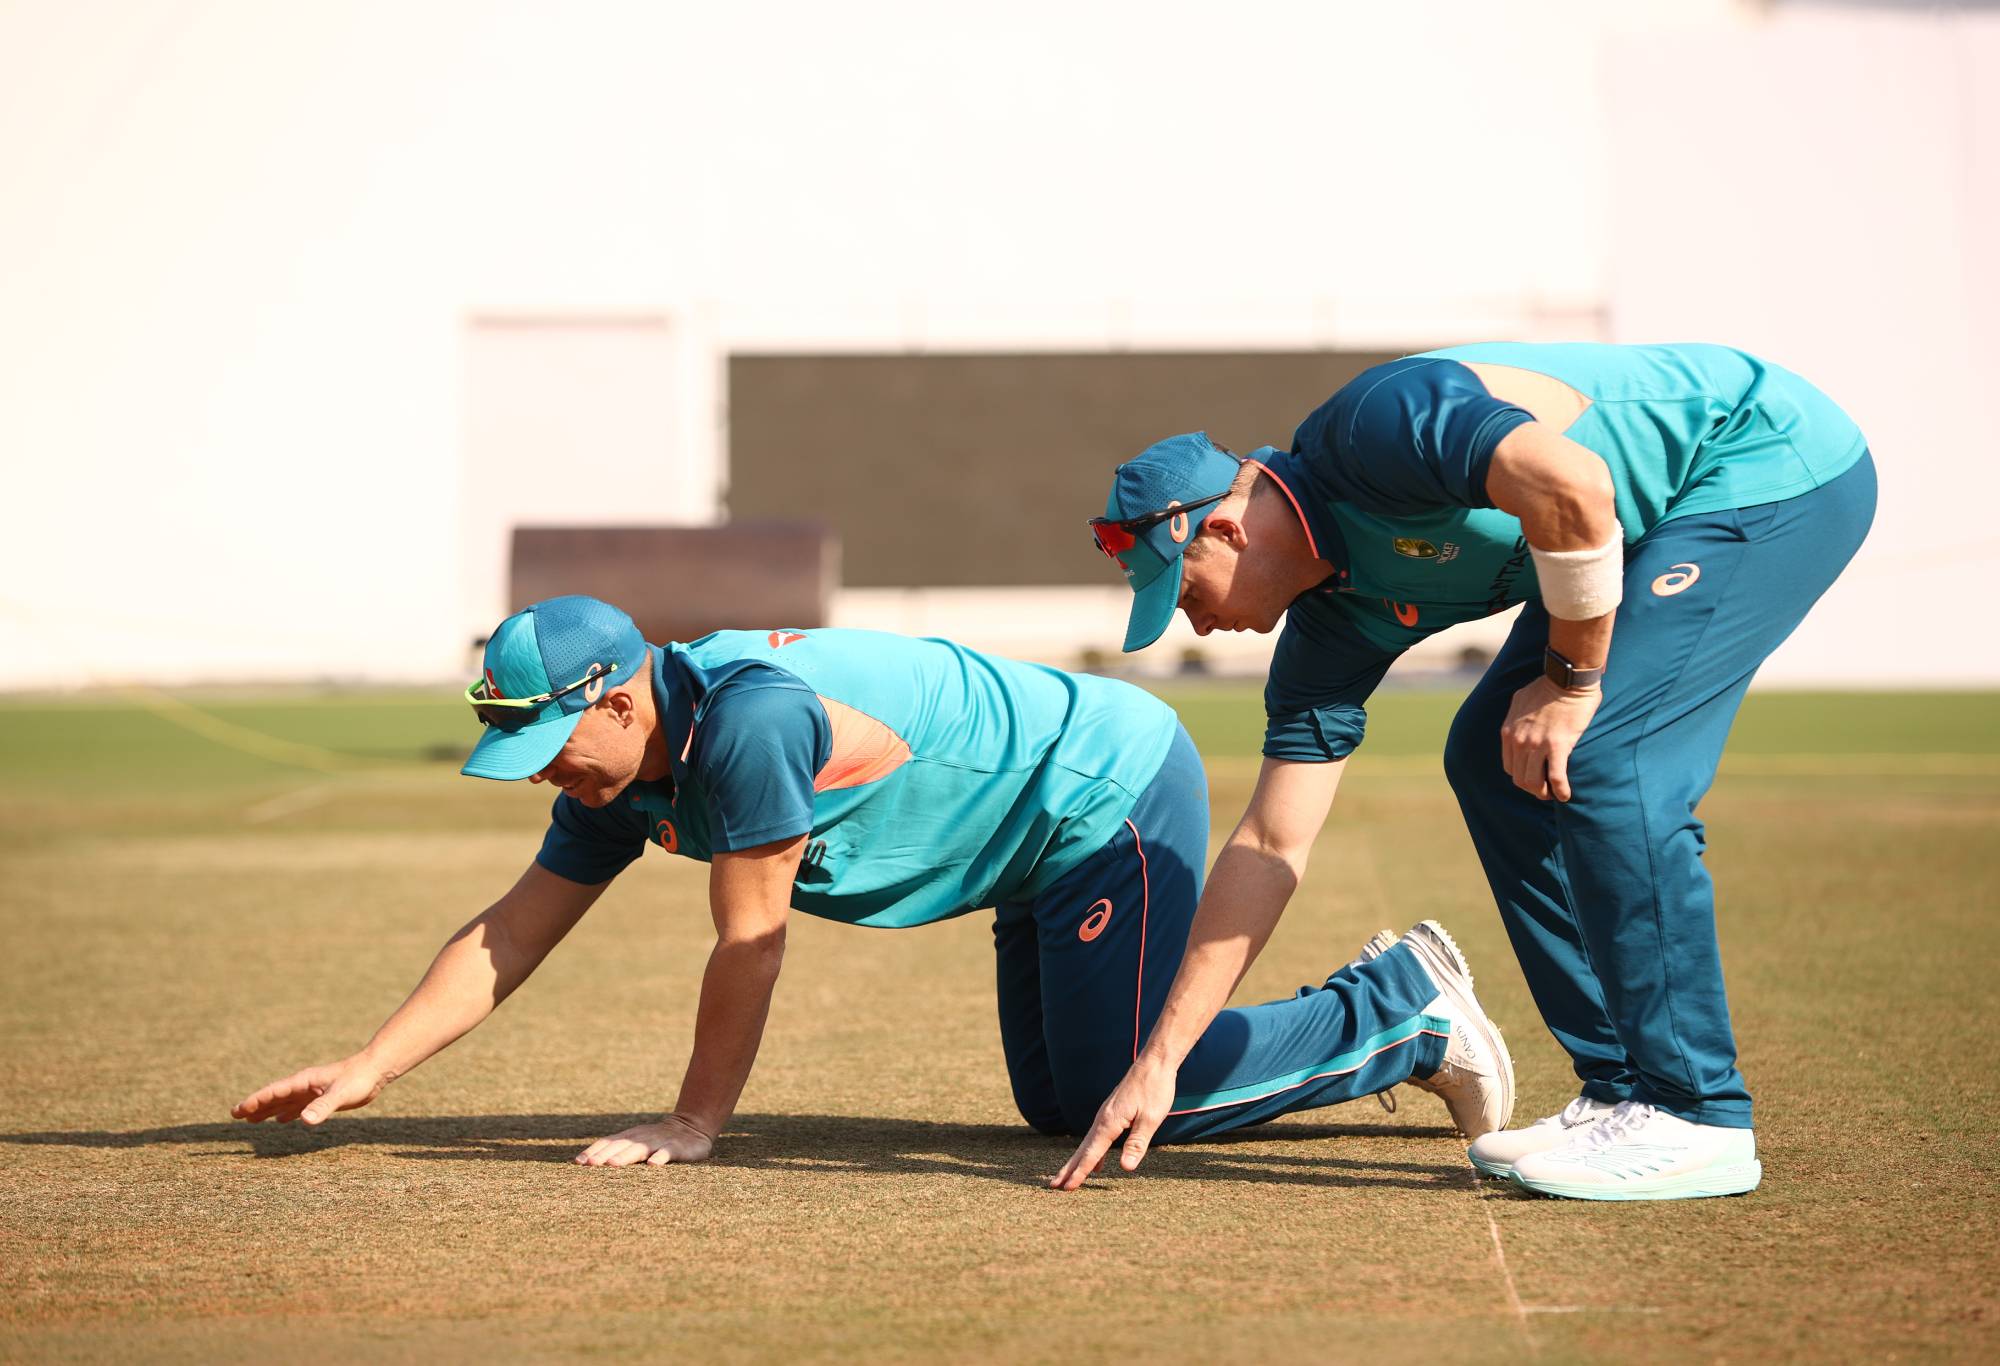 NAGPUR, INDIA - FEBRUARY 07: Steve Smith and David Warner of Australia check the pitchduring a training session at Vidarbha Cricket Association Ground on February 07, 2023 in Nagpur, India. (Photo by Robert Cianflone/Getty Images)